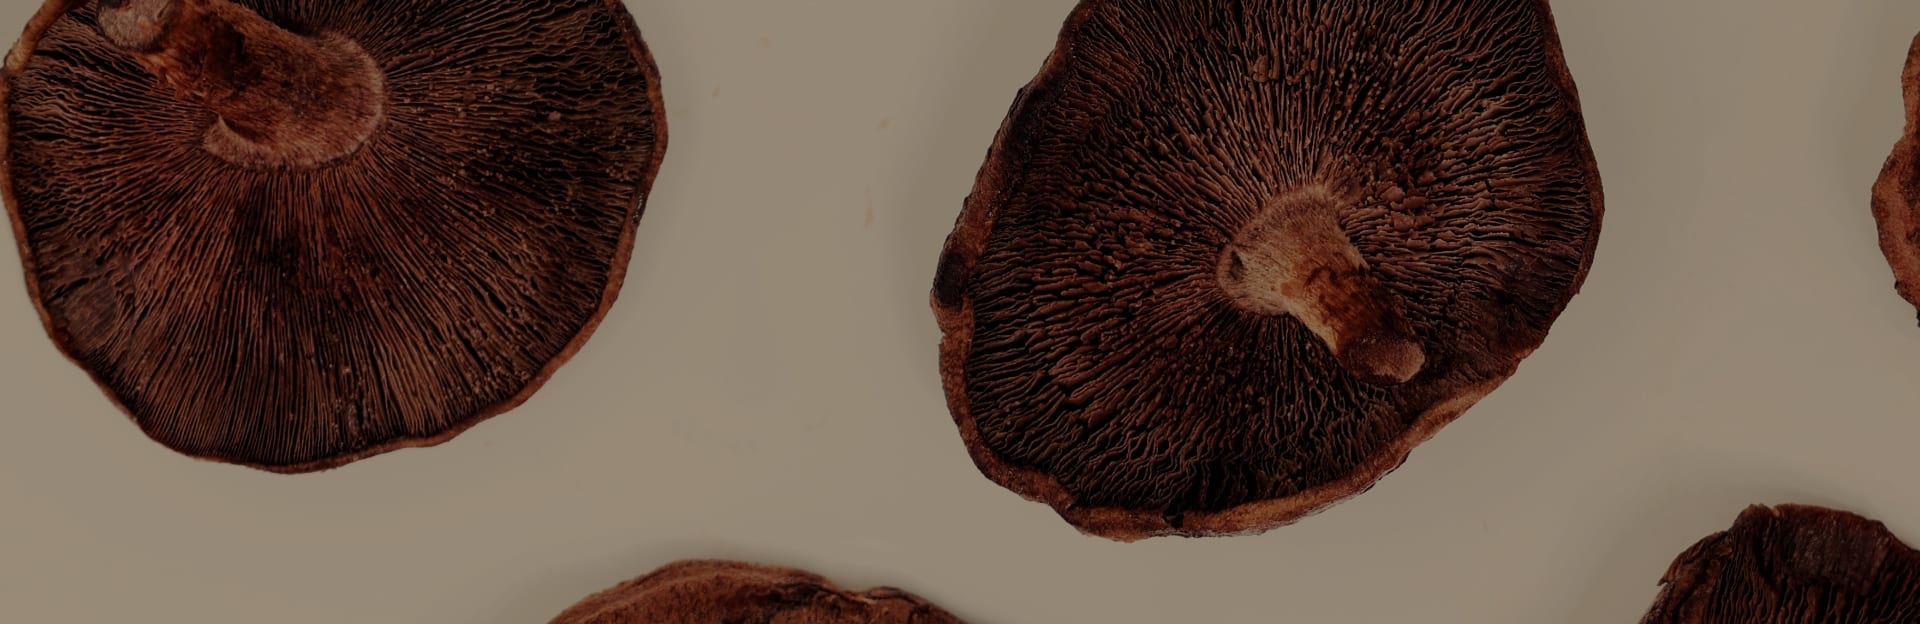 What do mushrooms do for your body?